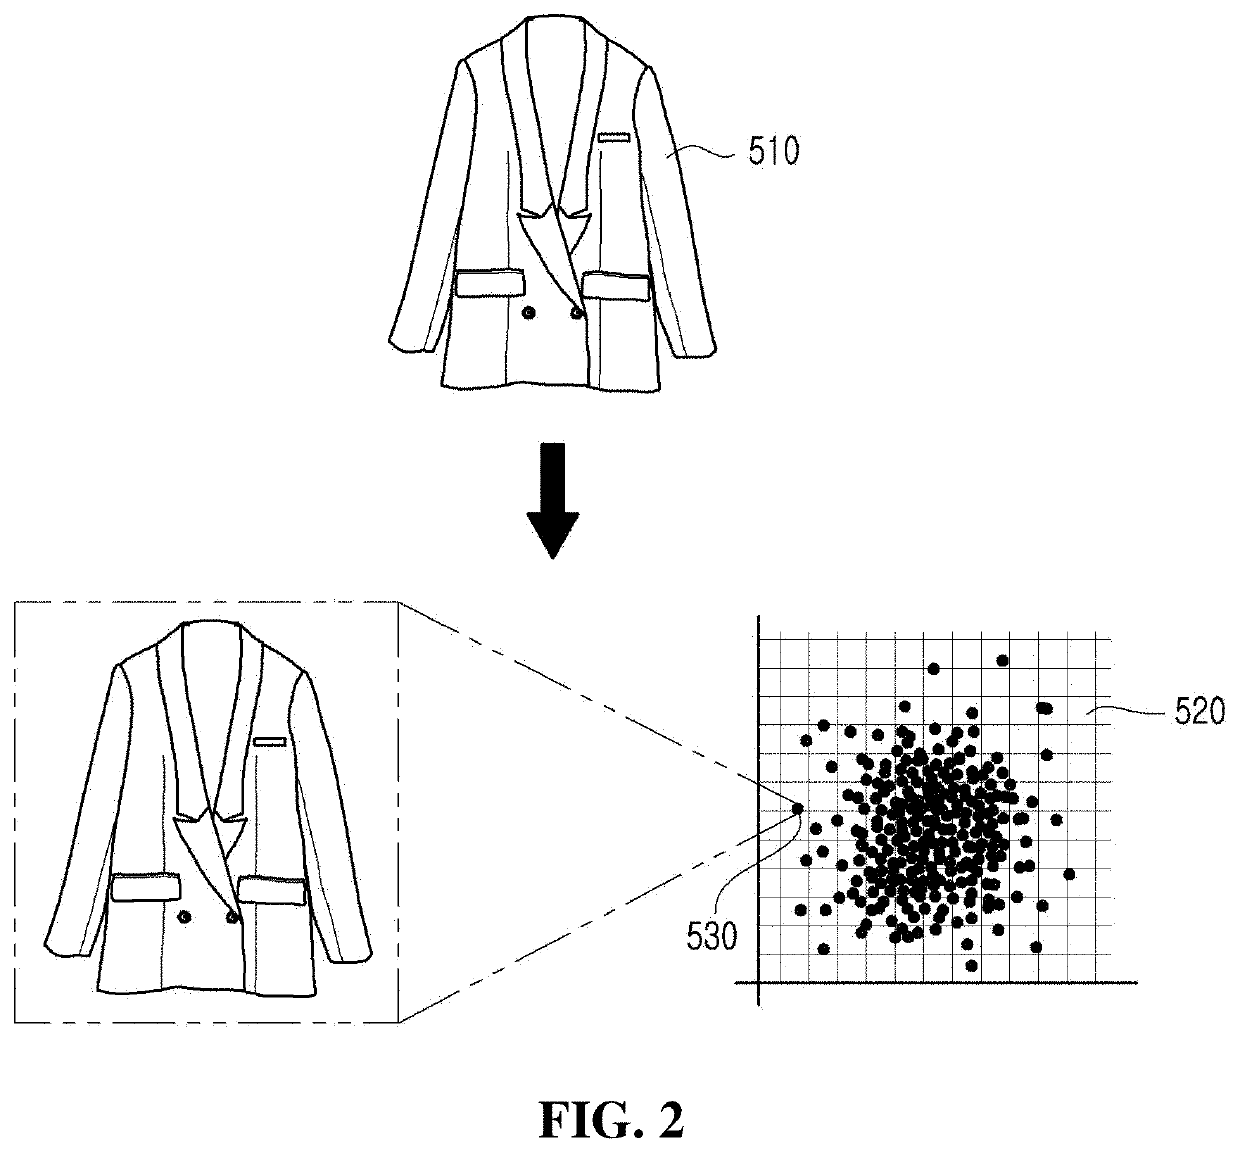 Automatic fashion outfit composition and recommendation system and method